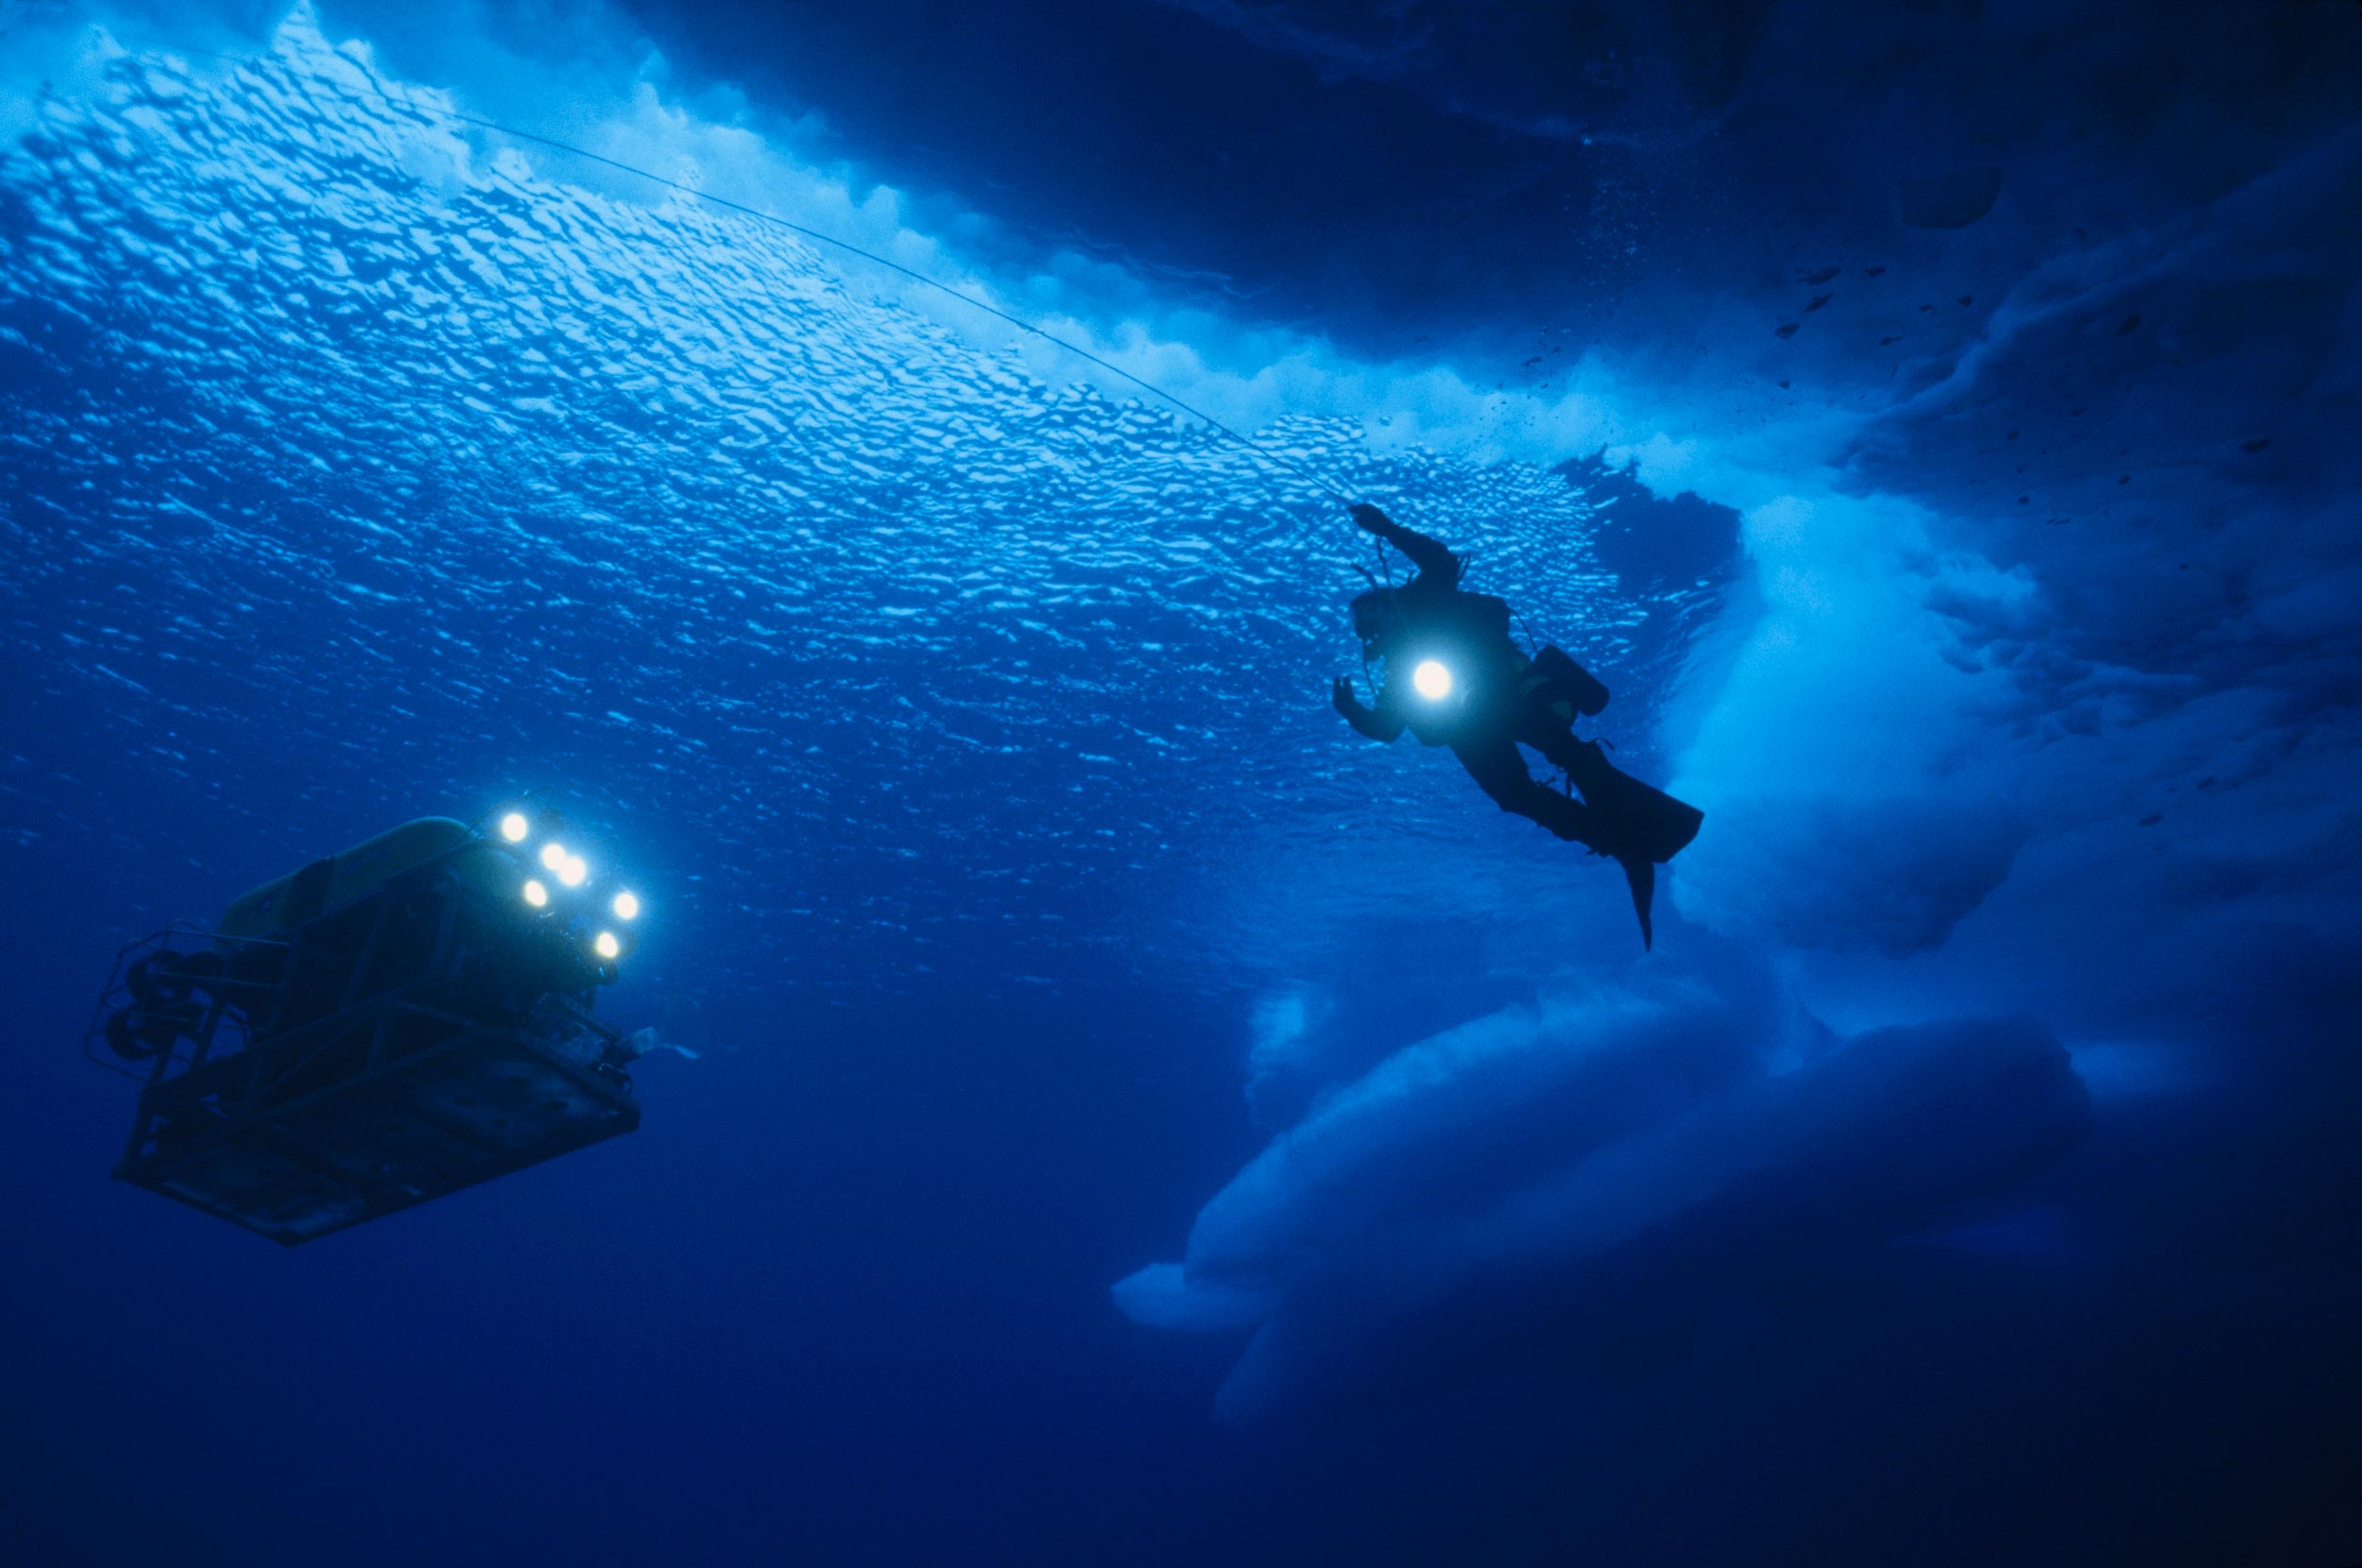 Diver with light in water near icebergs and a lights vehicle is near by